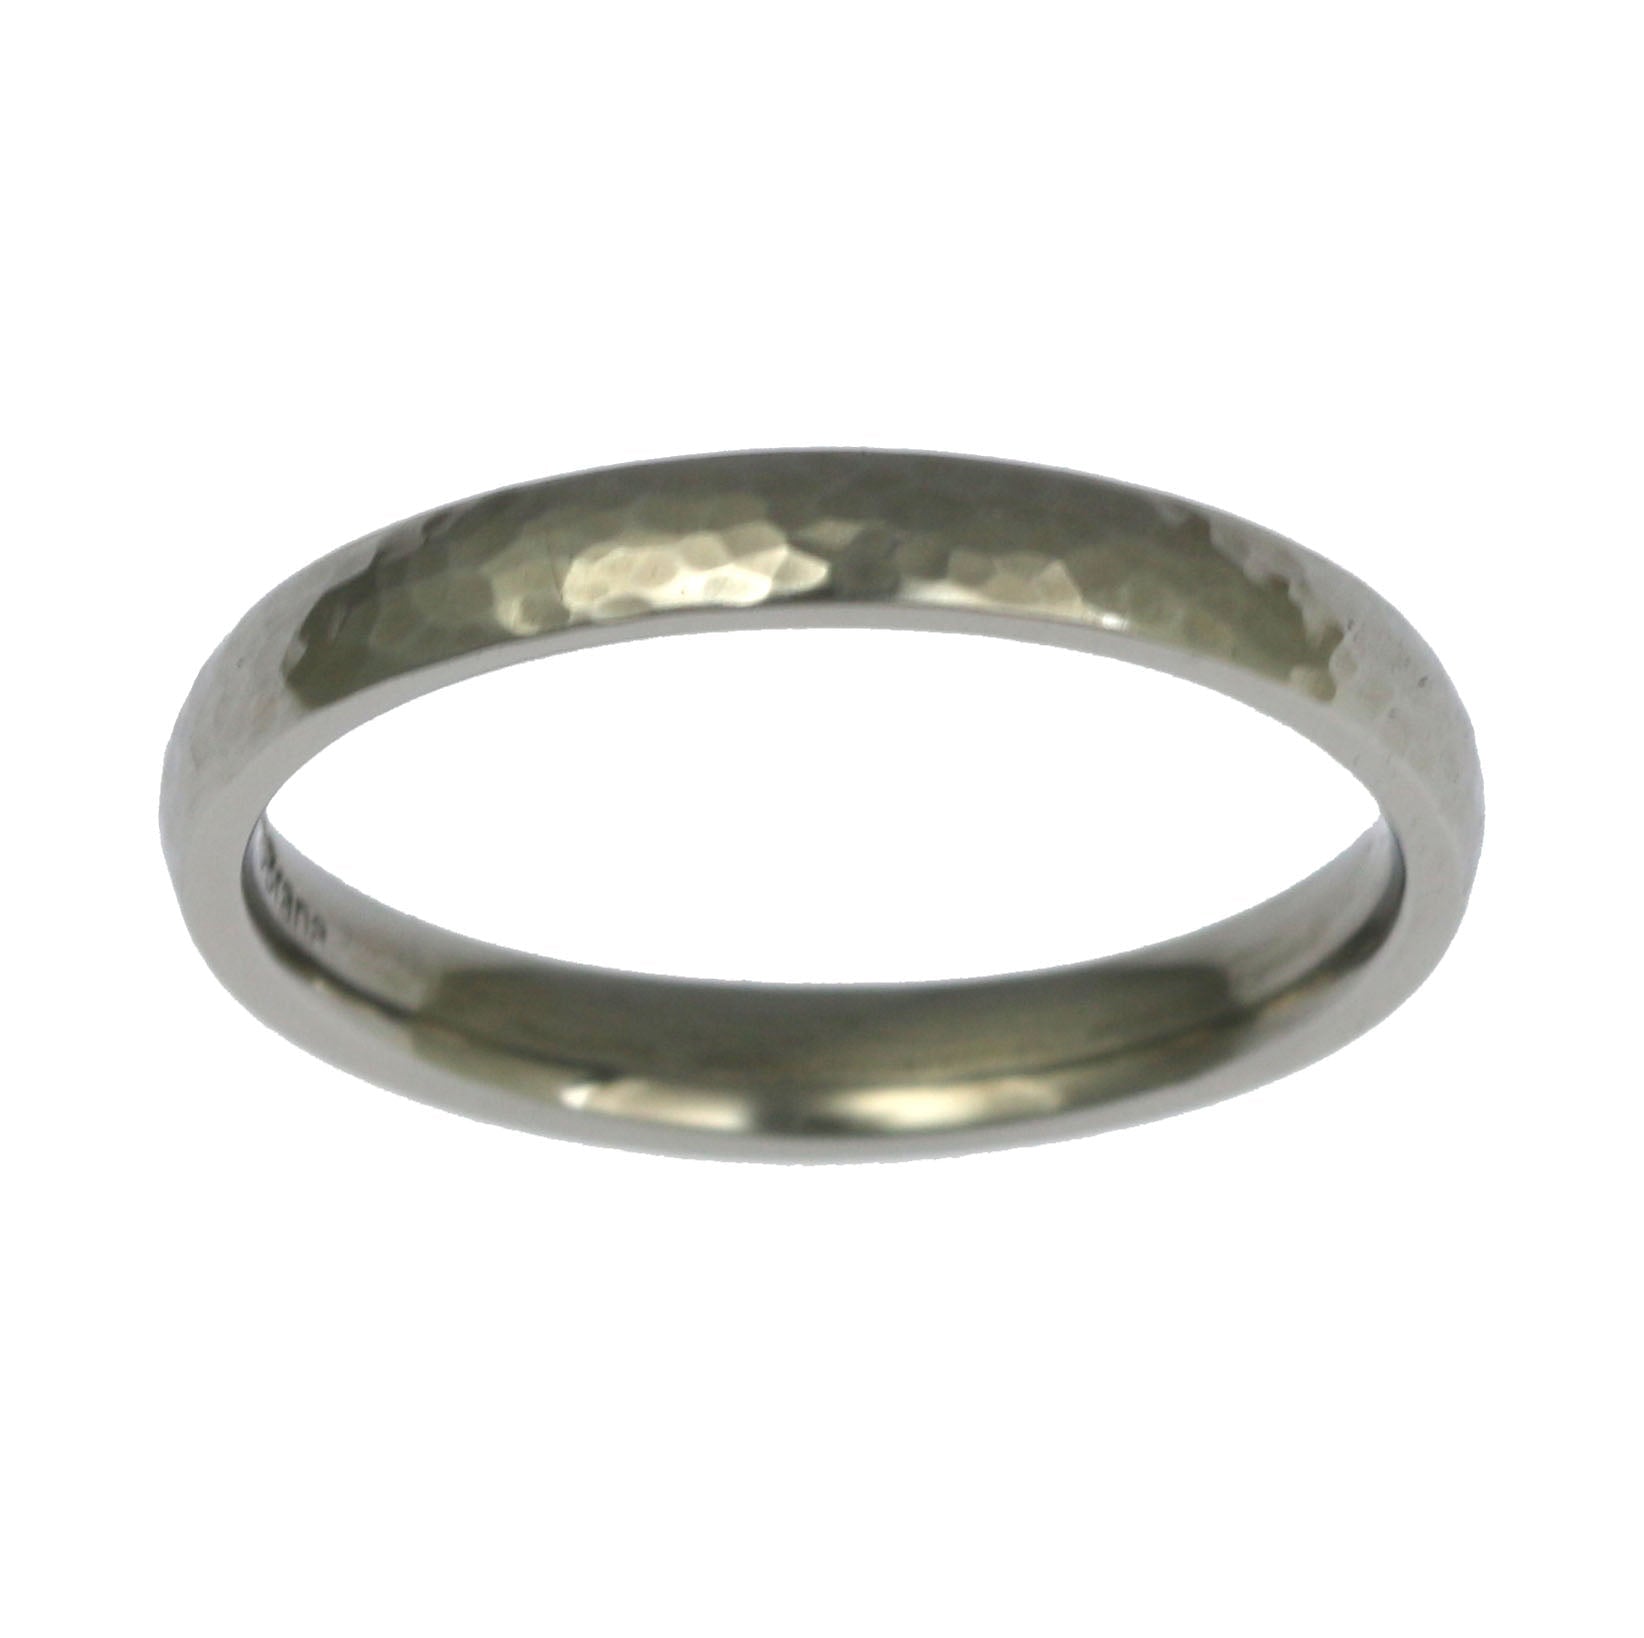 Top of 3mm Hammered Comfort Fit Stainless Steel Men's Ring